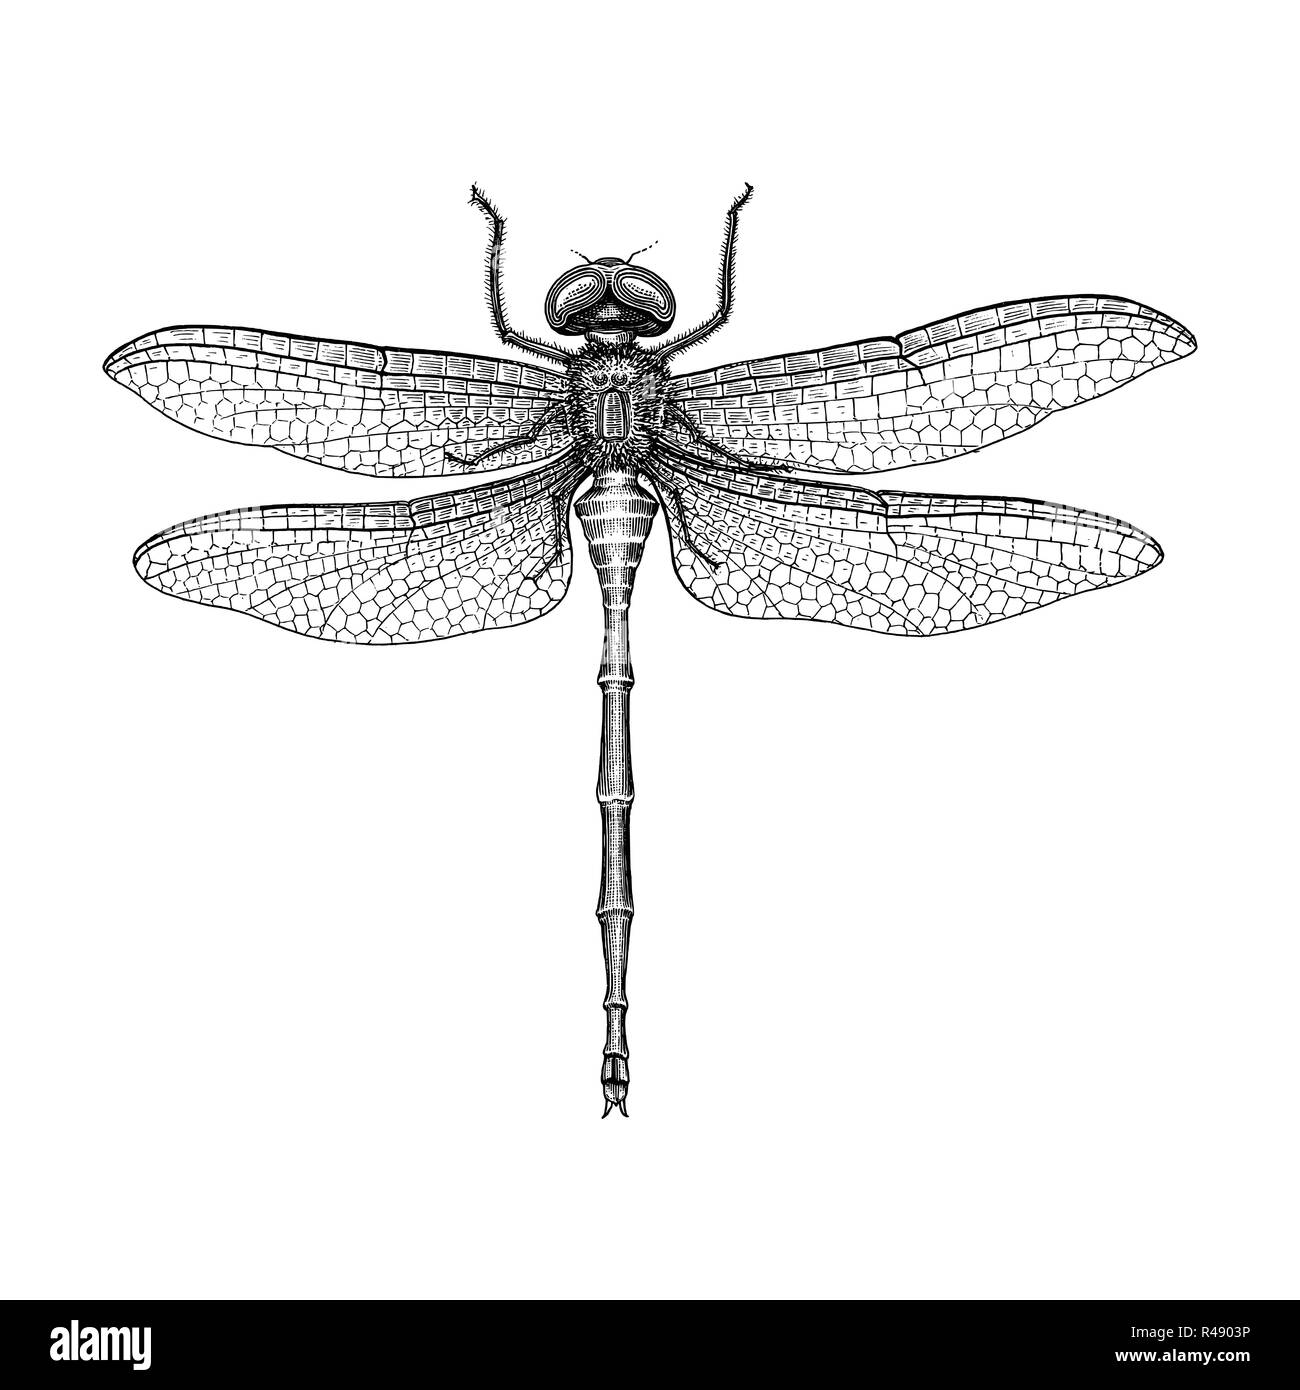 Dragonfly hand drawing vintage engraving illustration Stock Vector